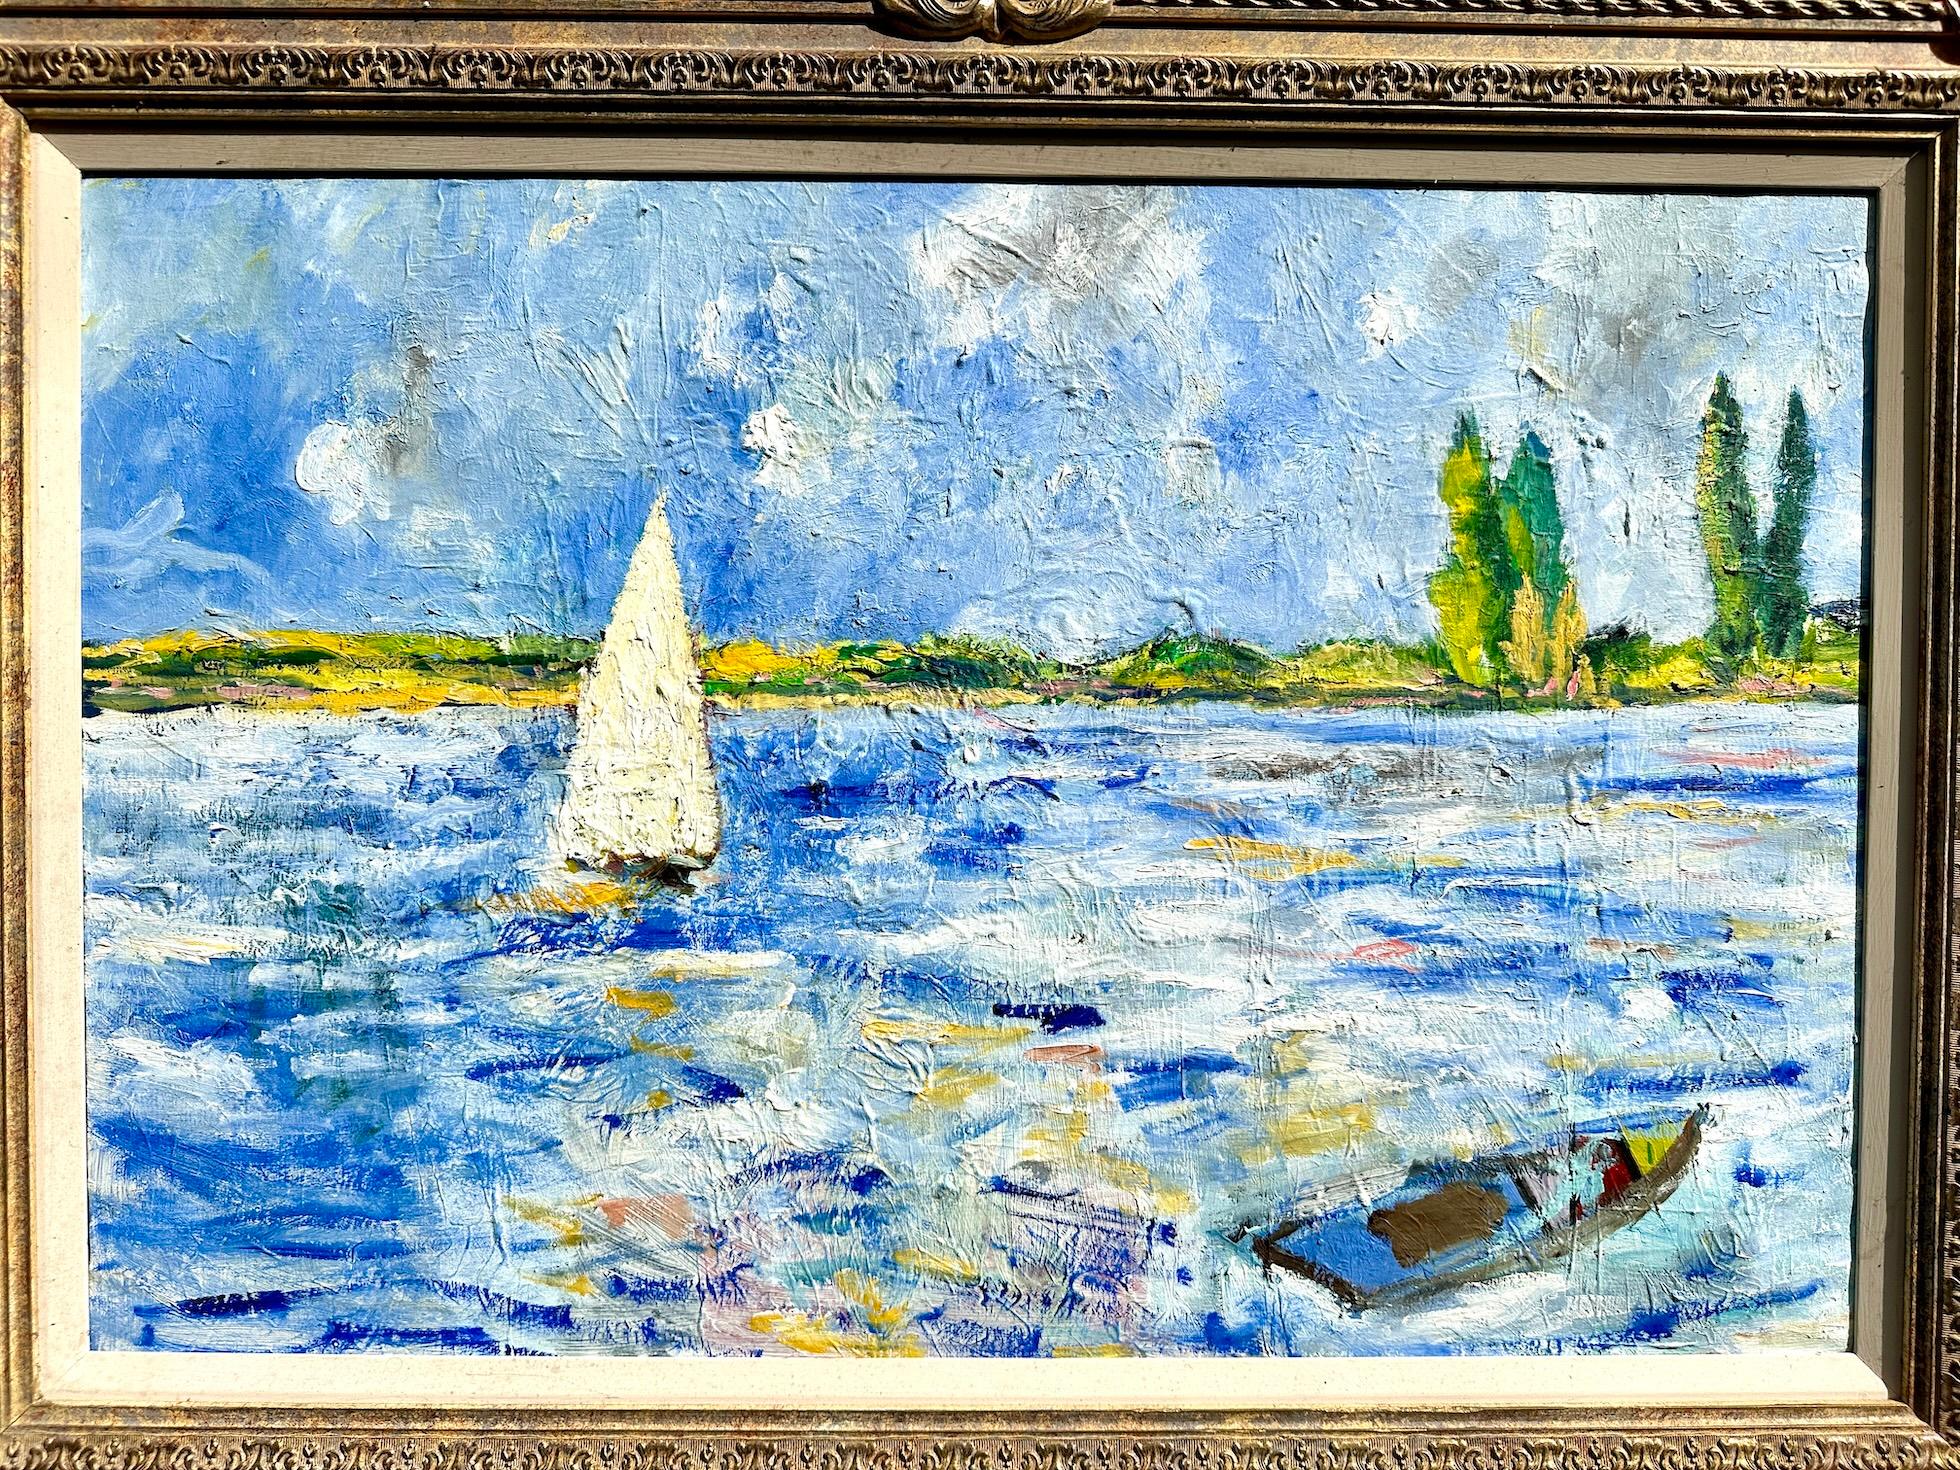 Charles Bertie Hall, Yacht sailing in a river.

Owning  an Impressionist marine landscape by Charles Bertie Hall, an English/American Impressionist painter, offers a unique opportunity to own a piece of art that captures the essence of nature with a